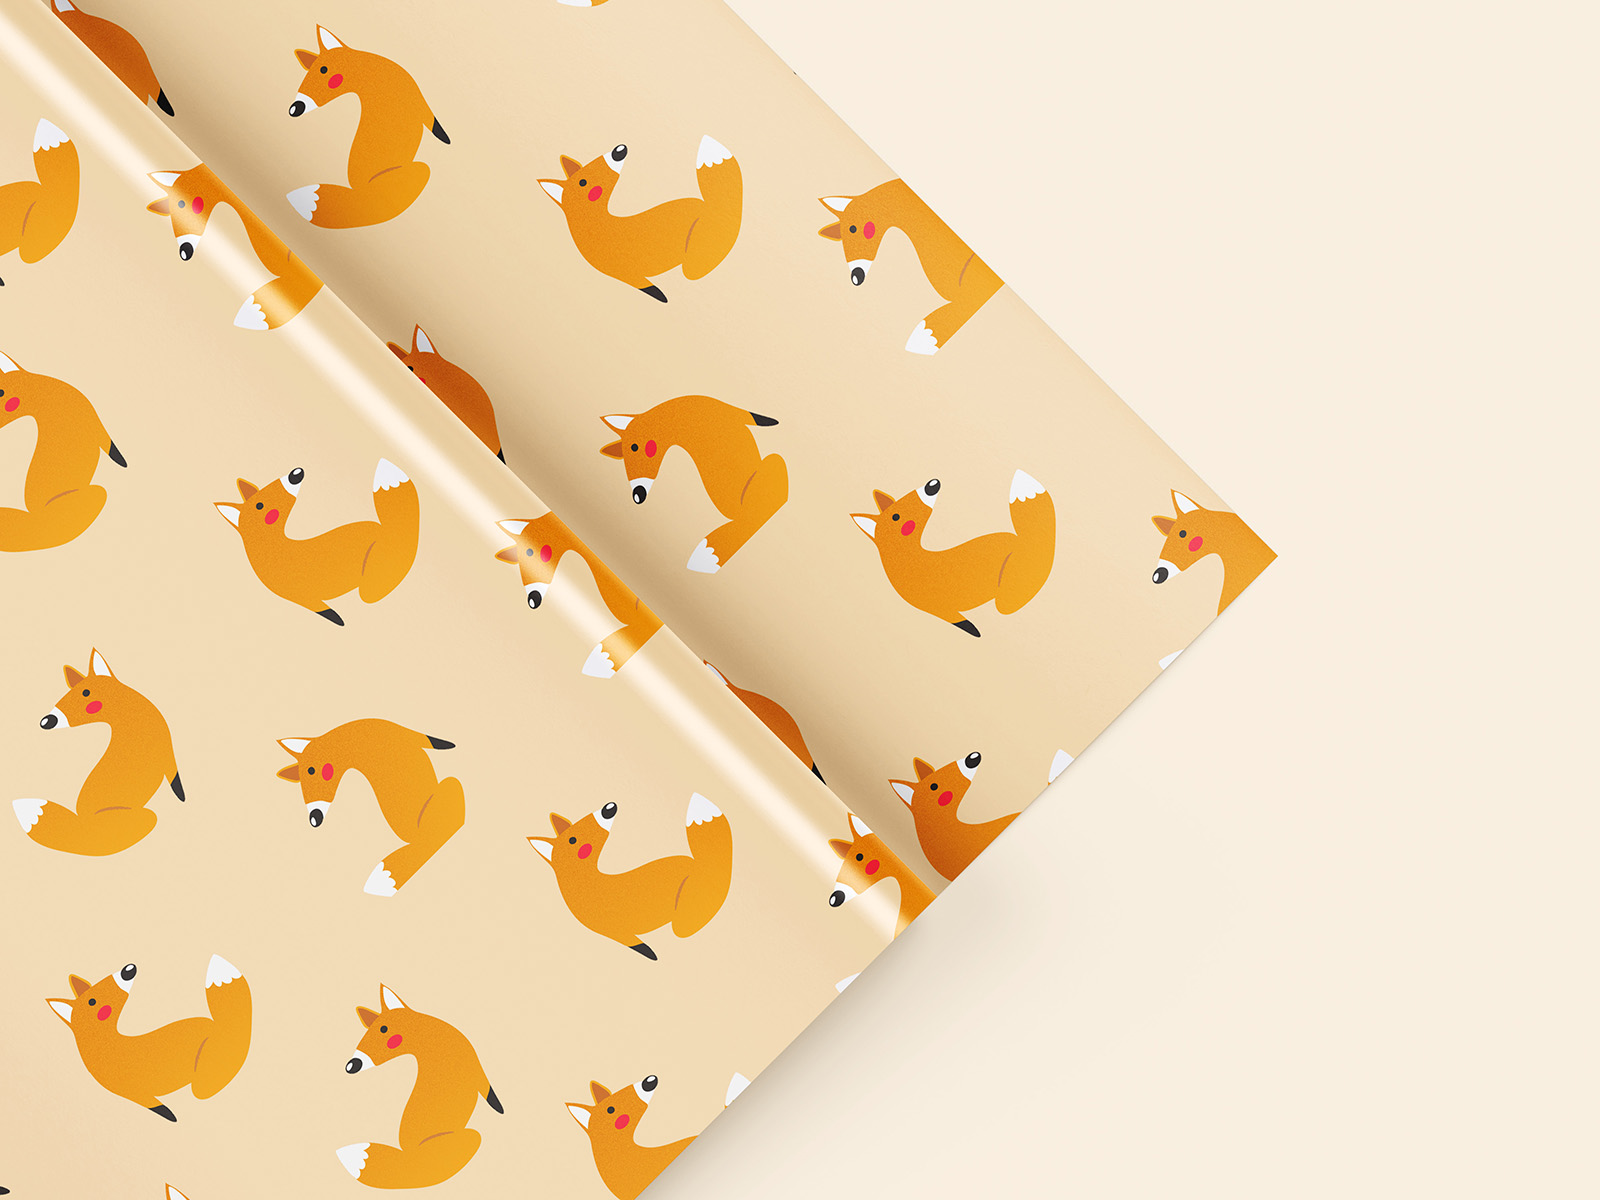 Wrapping Paper Mockup PSD, 35,000+ High Quality Free PSD Templates for  Download